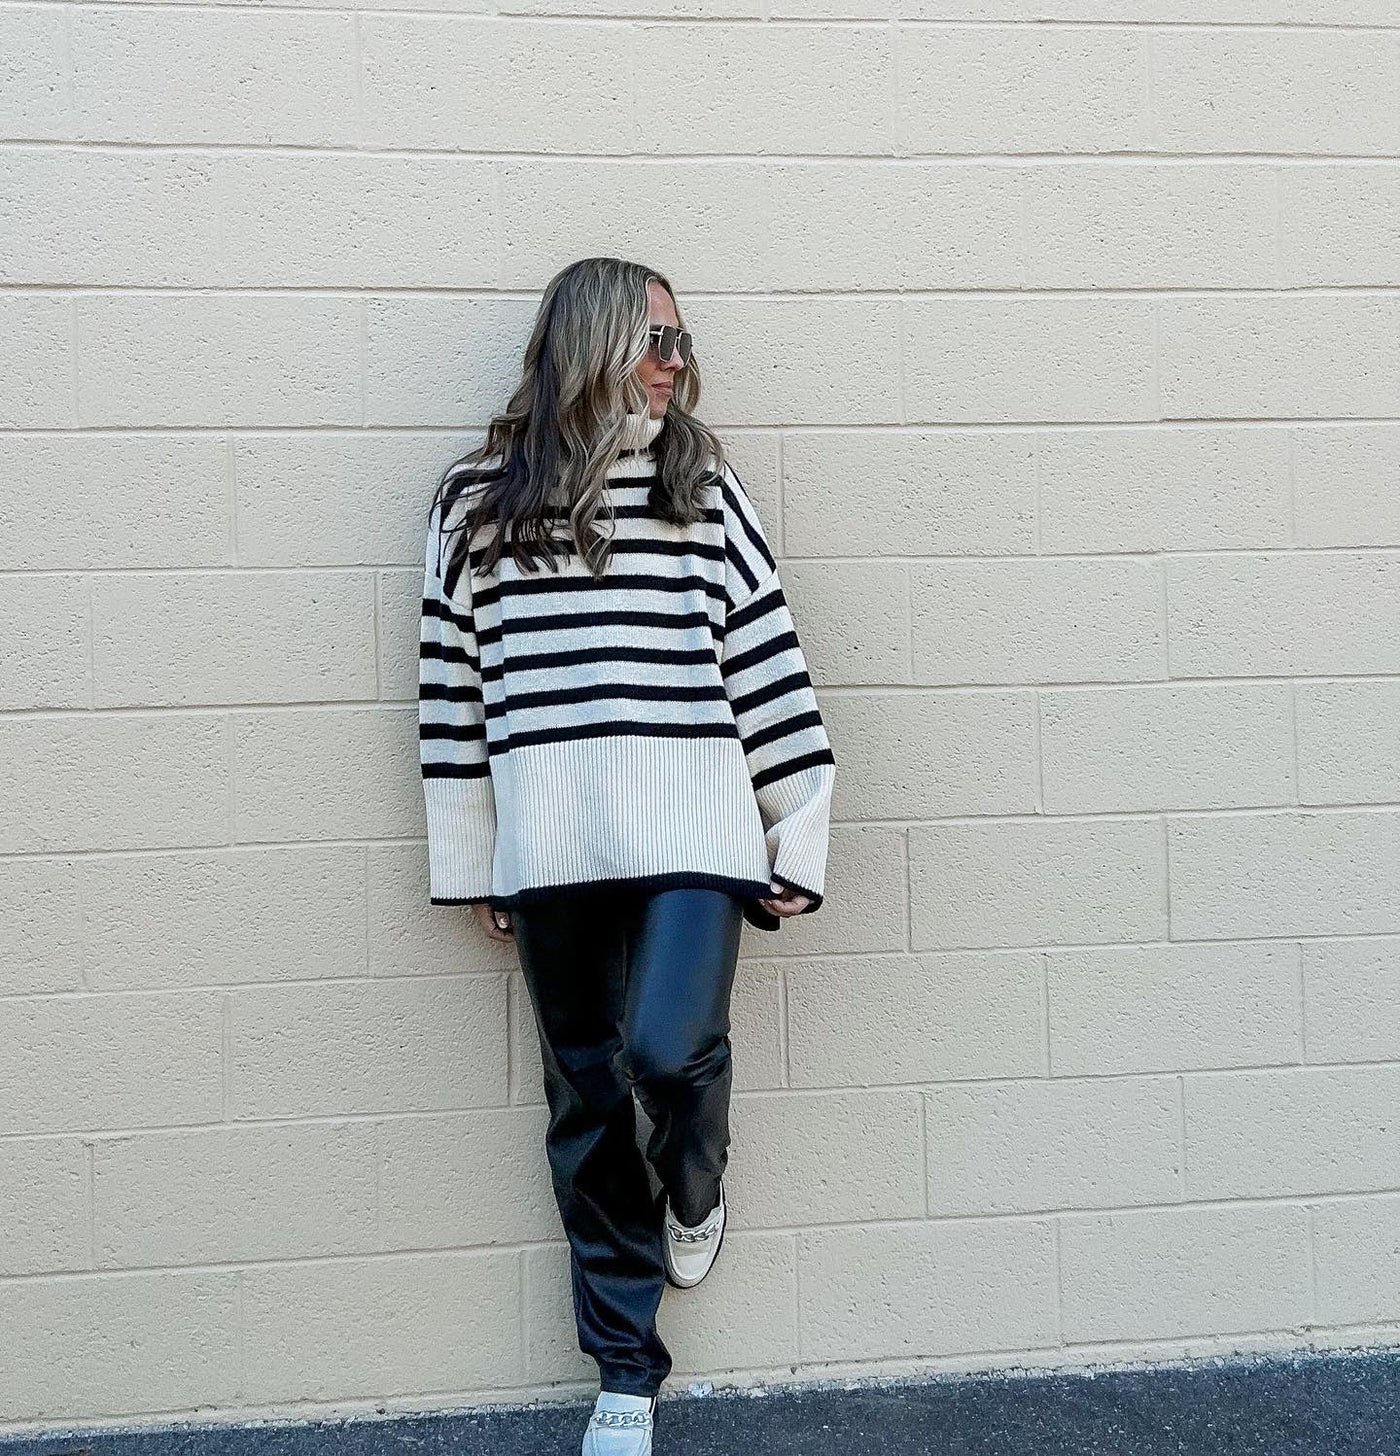 Stevie Striped Turtleneck Pullover Knit Sweater